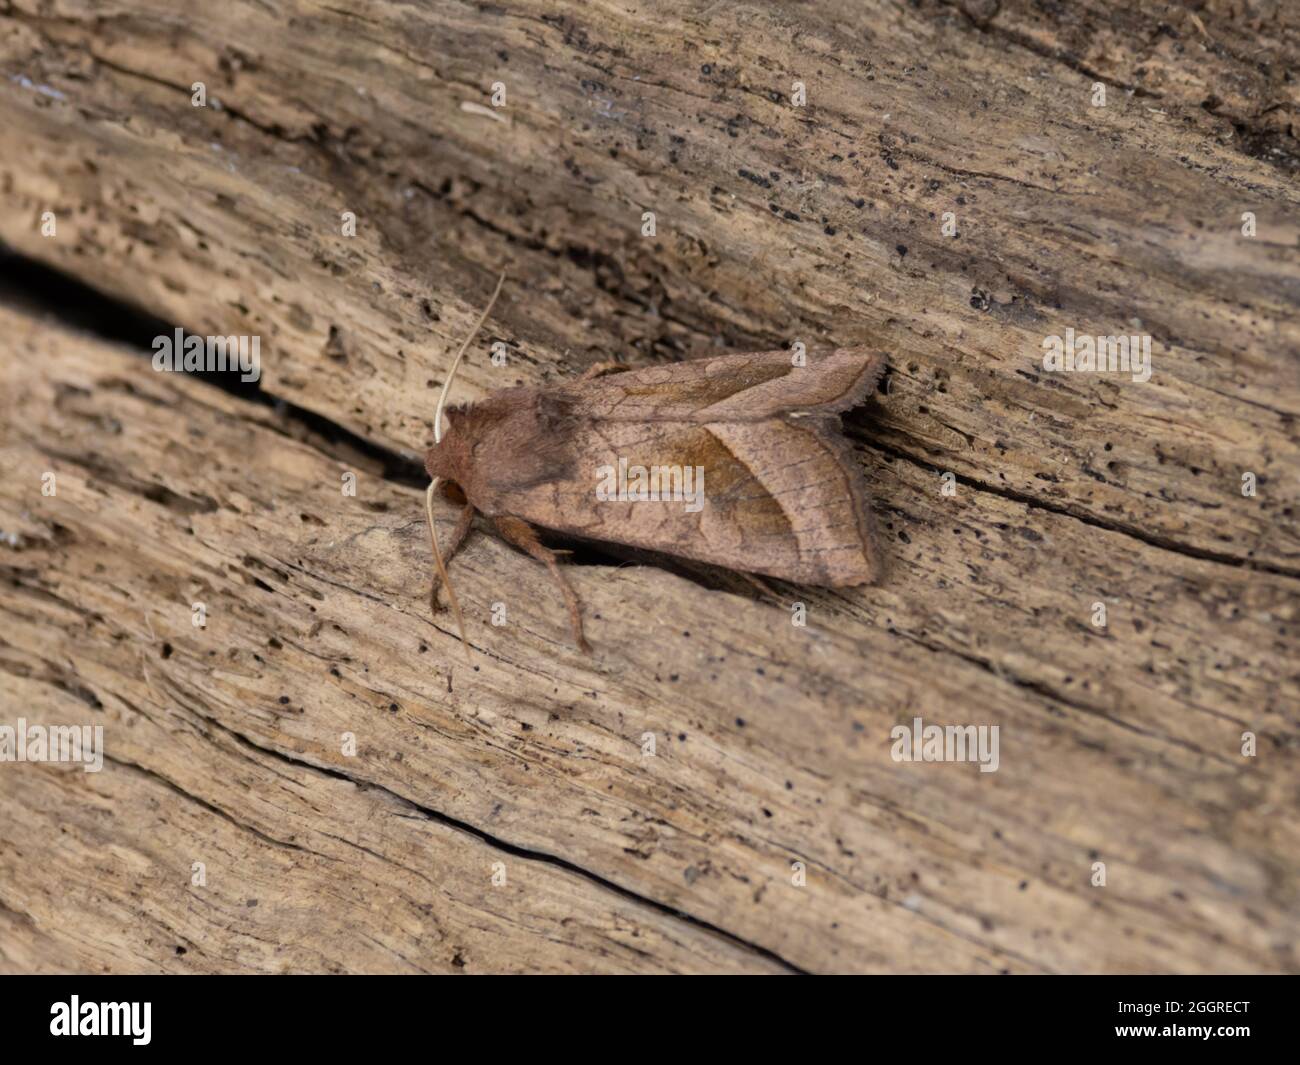 Hydraecia micacea, the Rosy Rustic Moth, perched on a log. Stock Photo